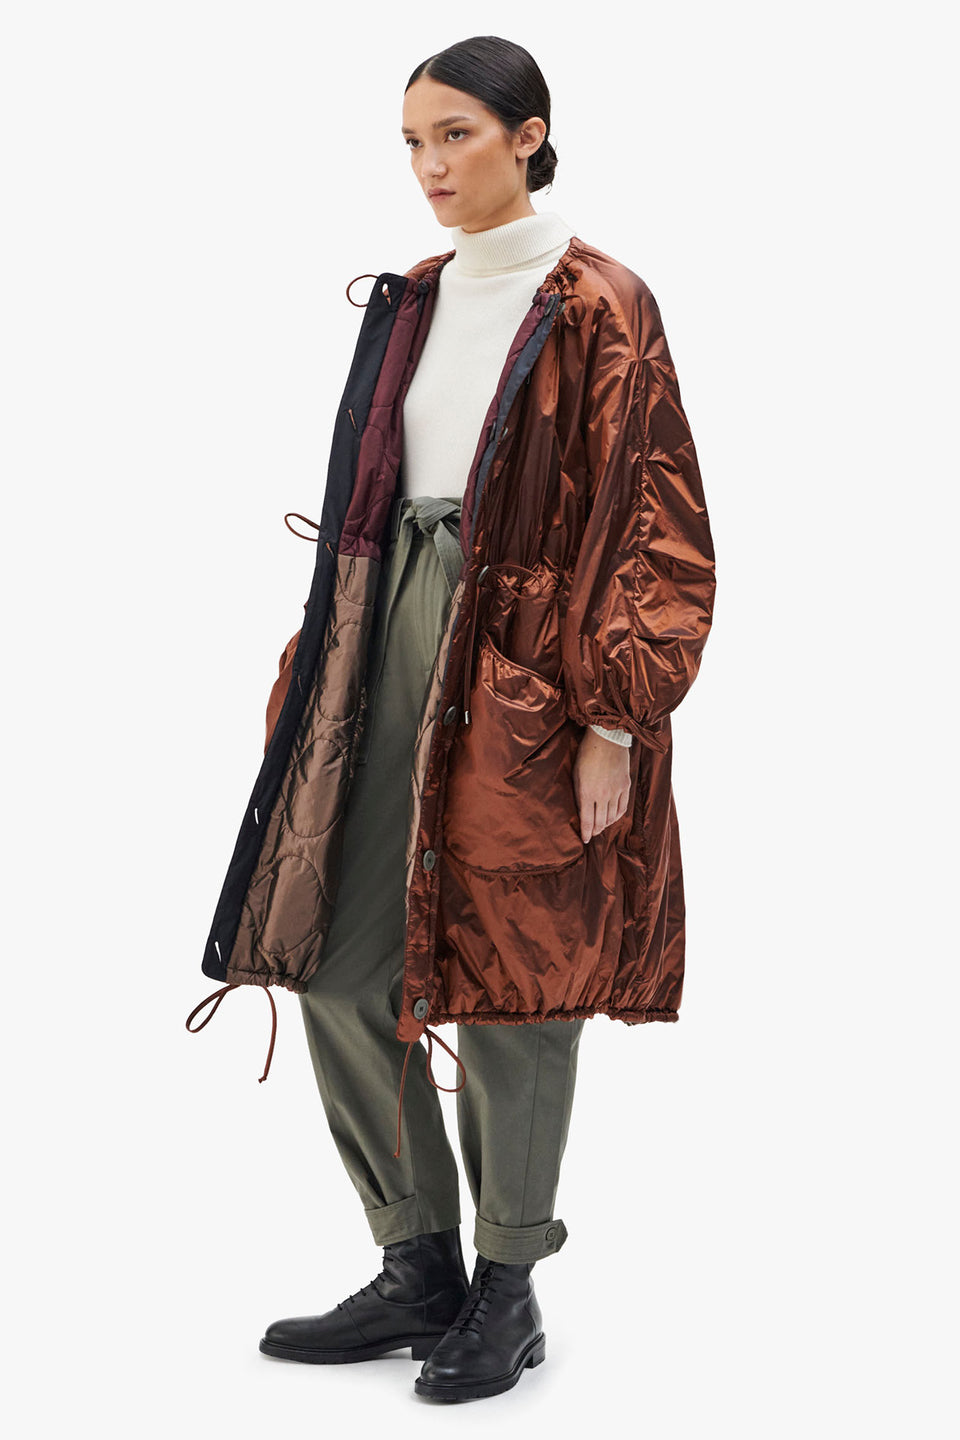 Parachute Quilt Parka - Wine / Amber (listing page thumbnail)